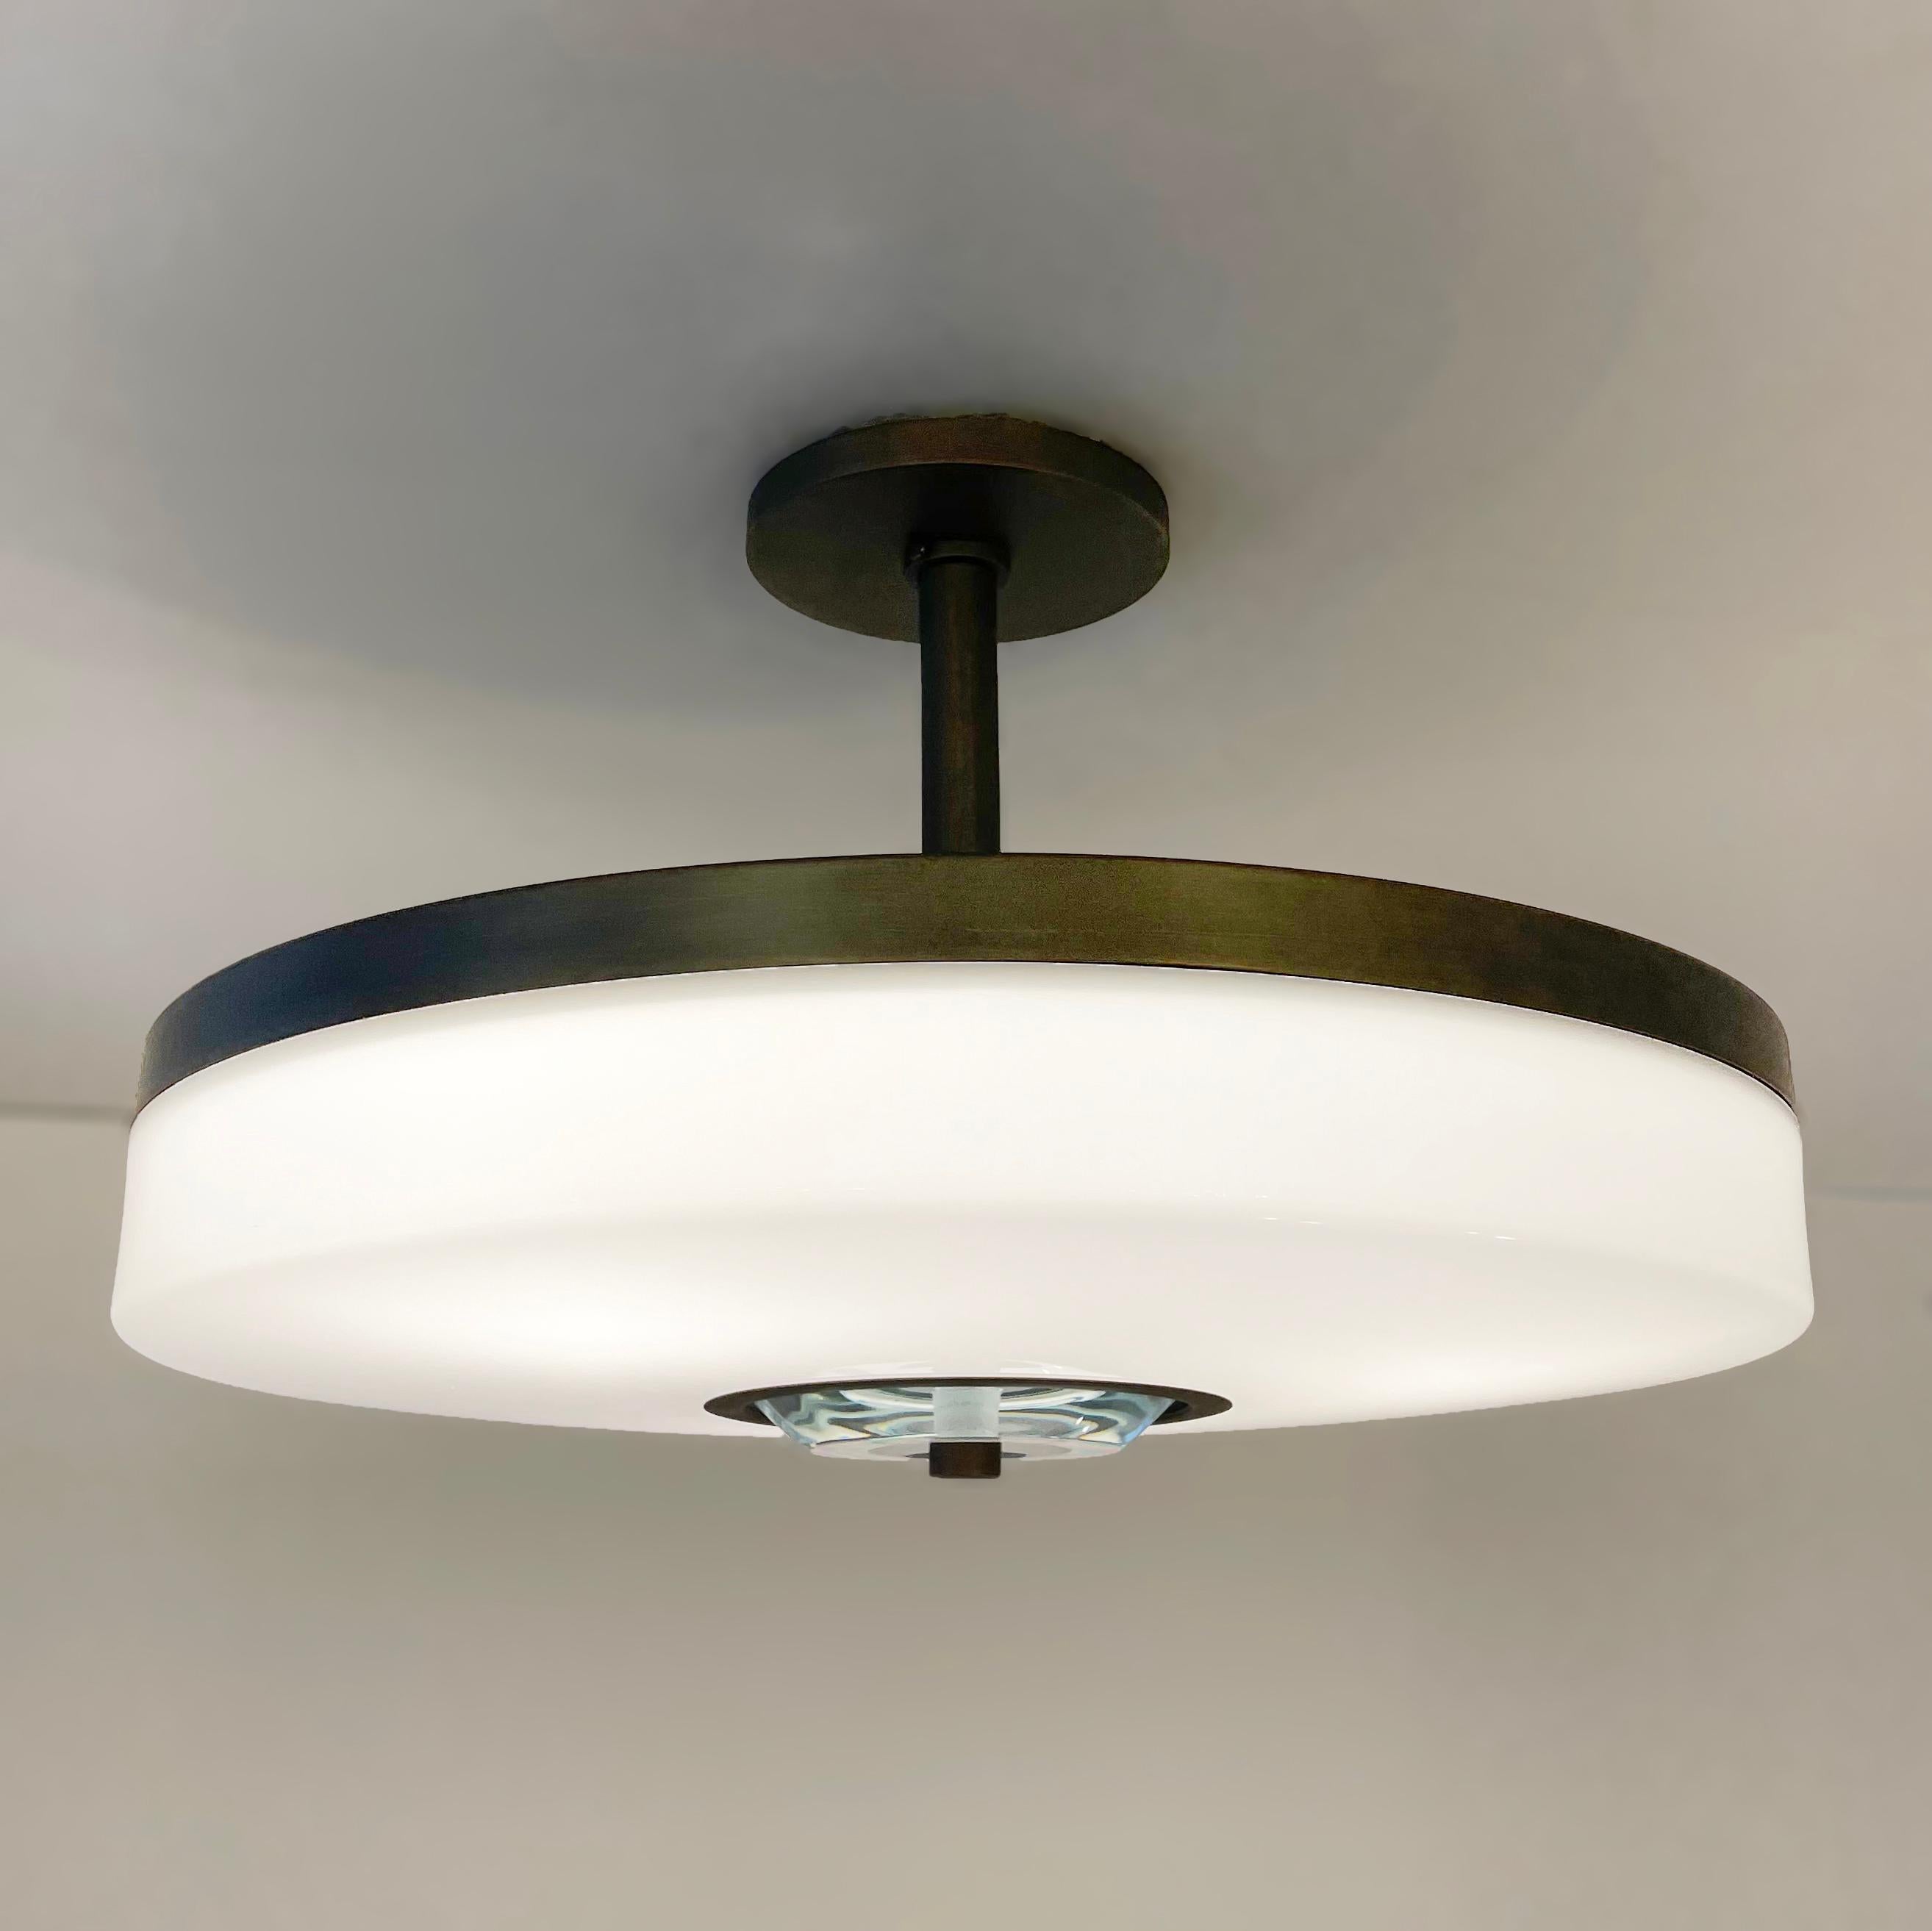 Contemporary Iris Piccolo Ceiling Light by Gaspare Asaro- Polished Nickel Finish For Sale